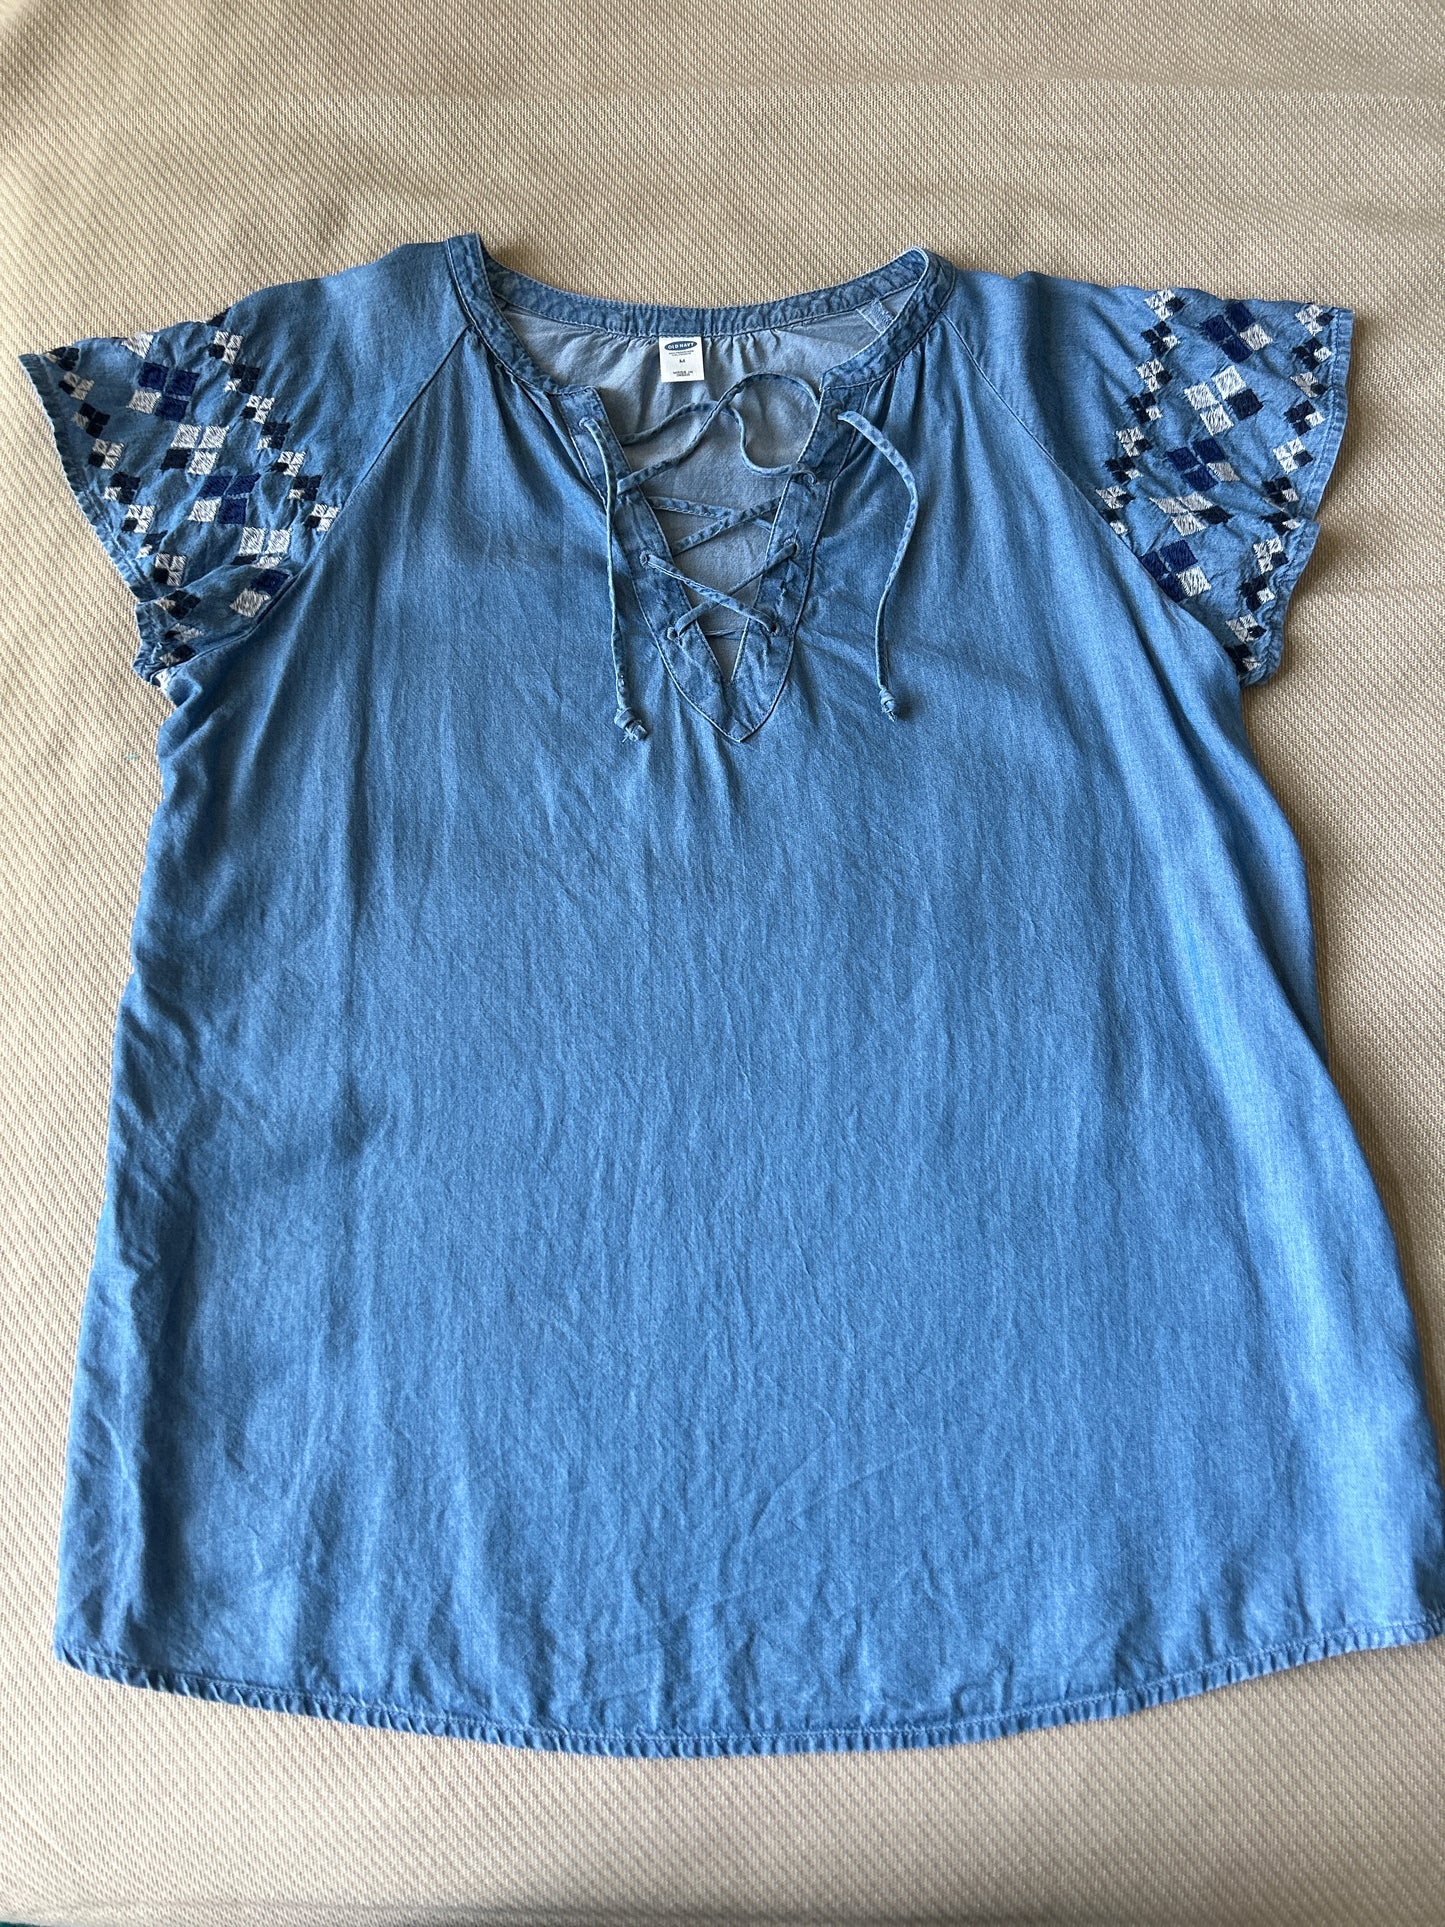 Old Navy/Women’s Chambray Top/Size M